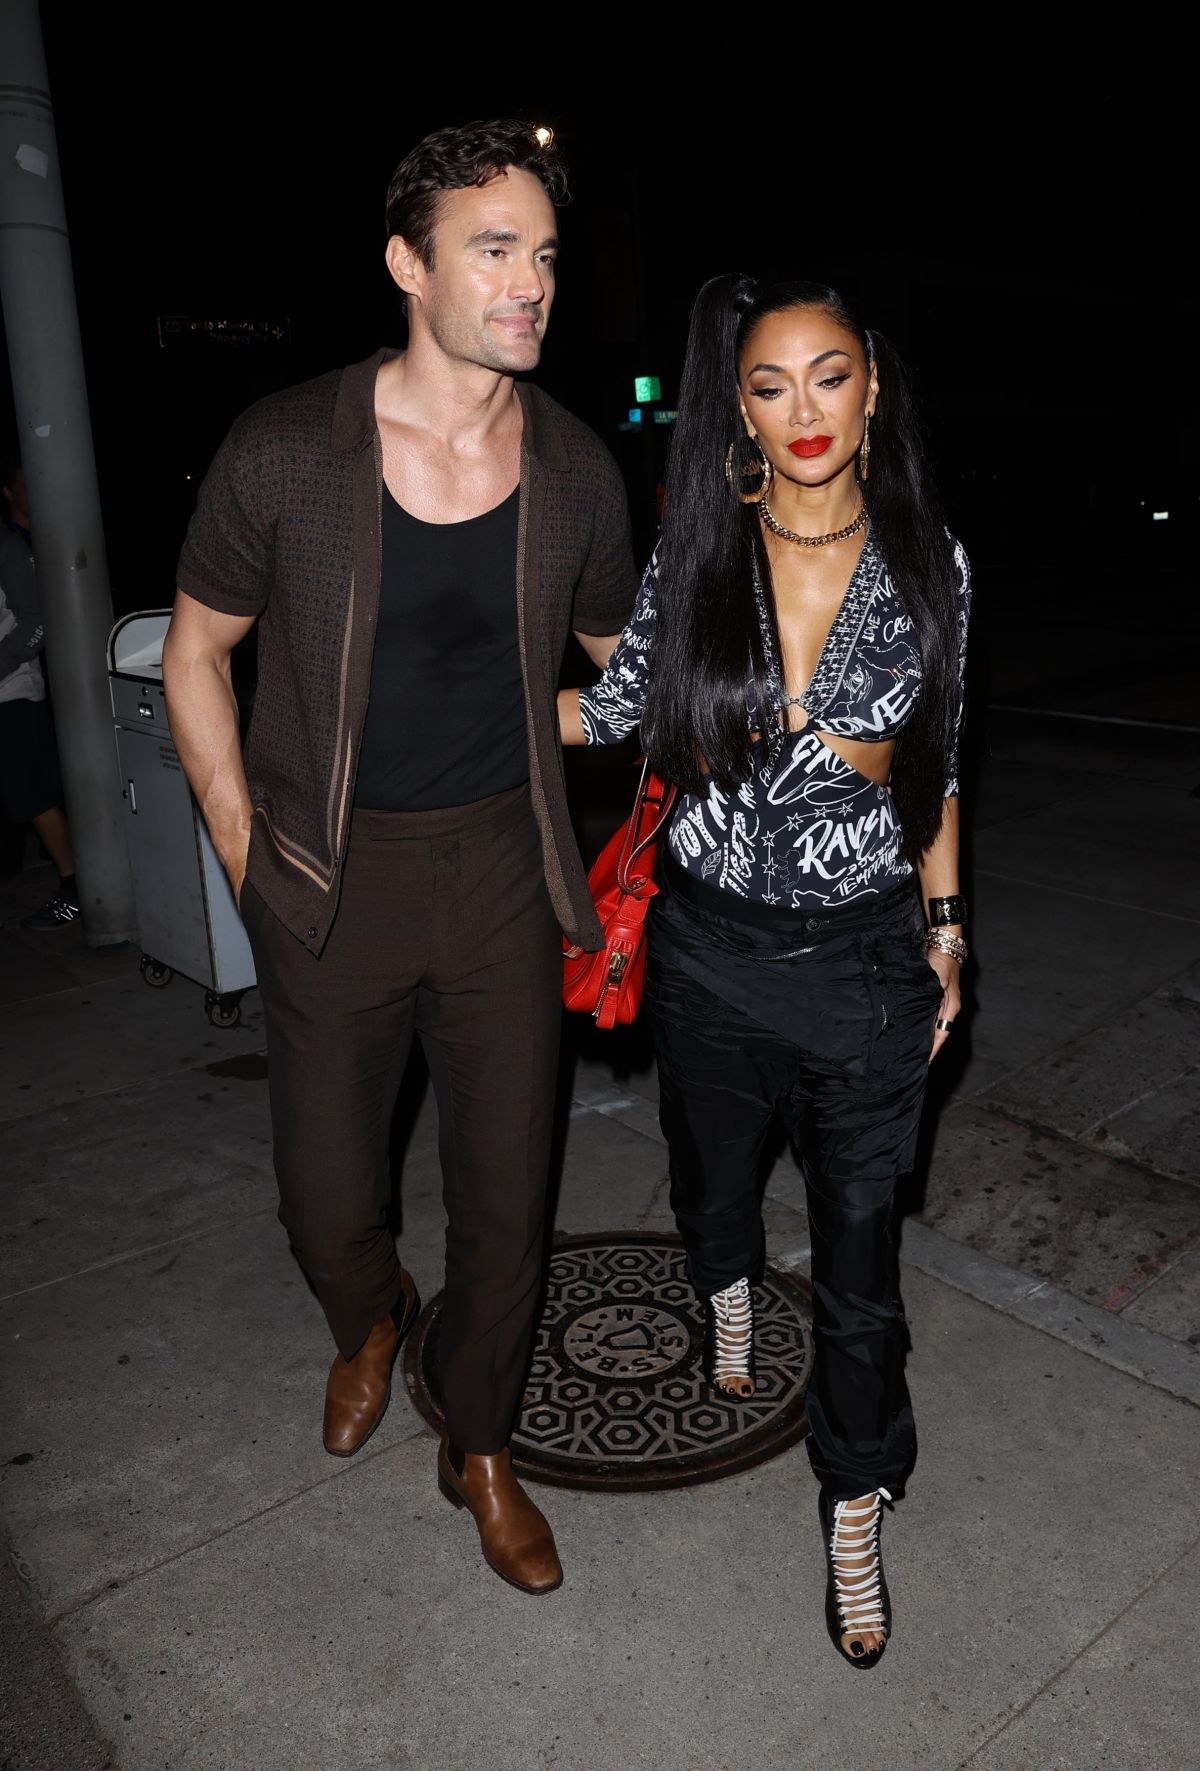 Nicole Scherzinger And Thom Evans Arrives For Dinner At Craigs In West Hollywood 10102022 5943